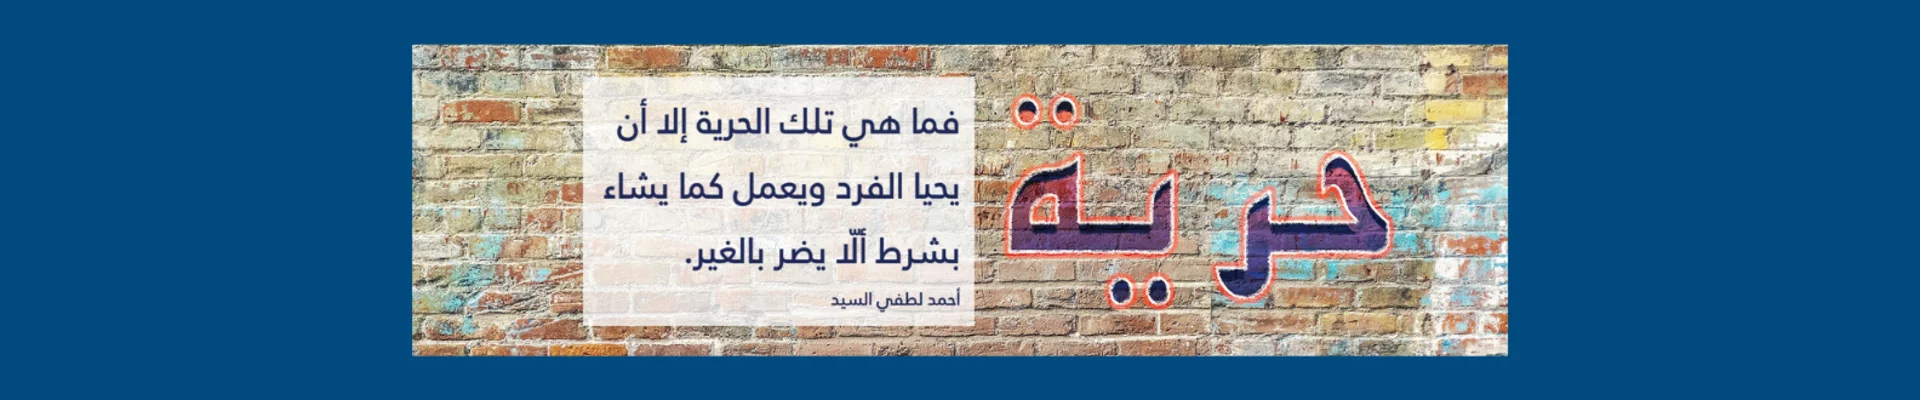 bel arabi platform Discovering Free voices and Inspirational Stories in the Arab World